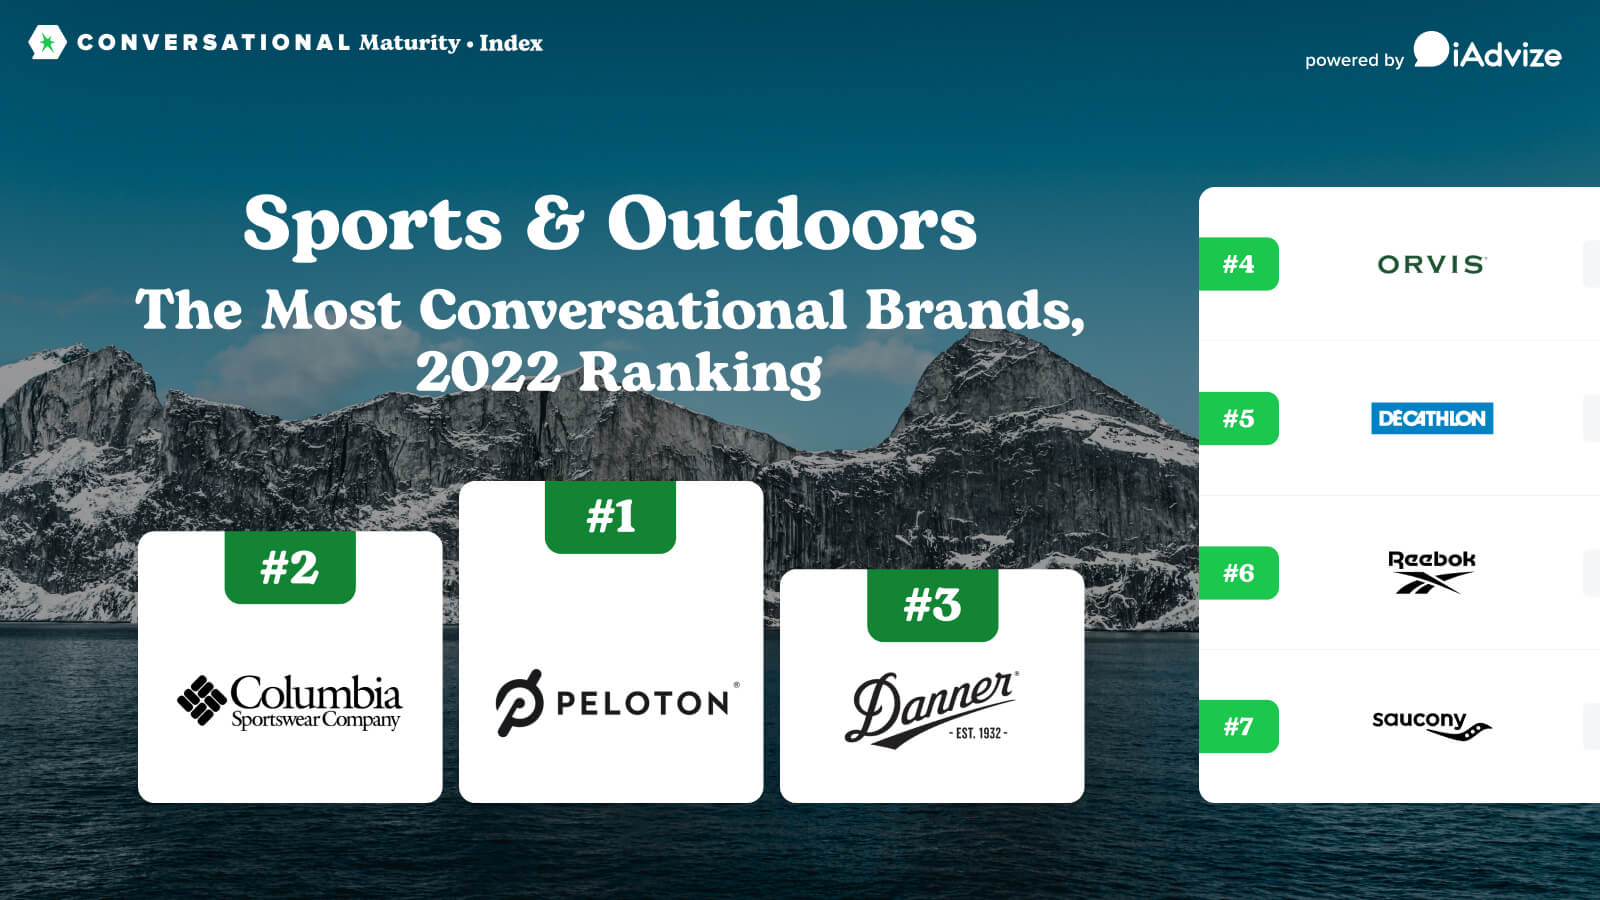  Featured image: Conversational maturity index for sporting goods brands - Read full post: Conversational Maturity Index: Sporting Goods Brands 2022 Rankings